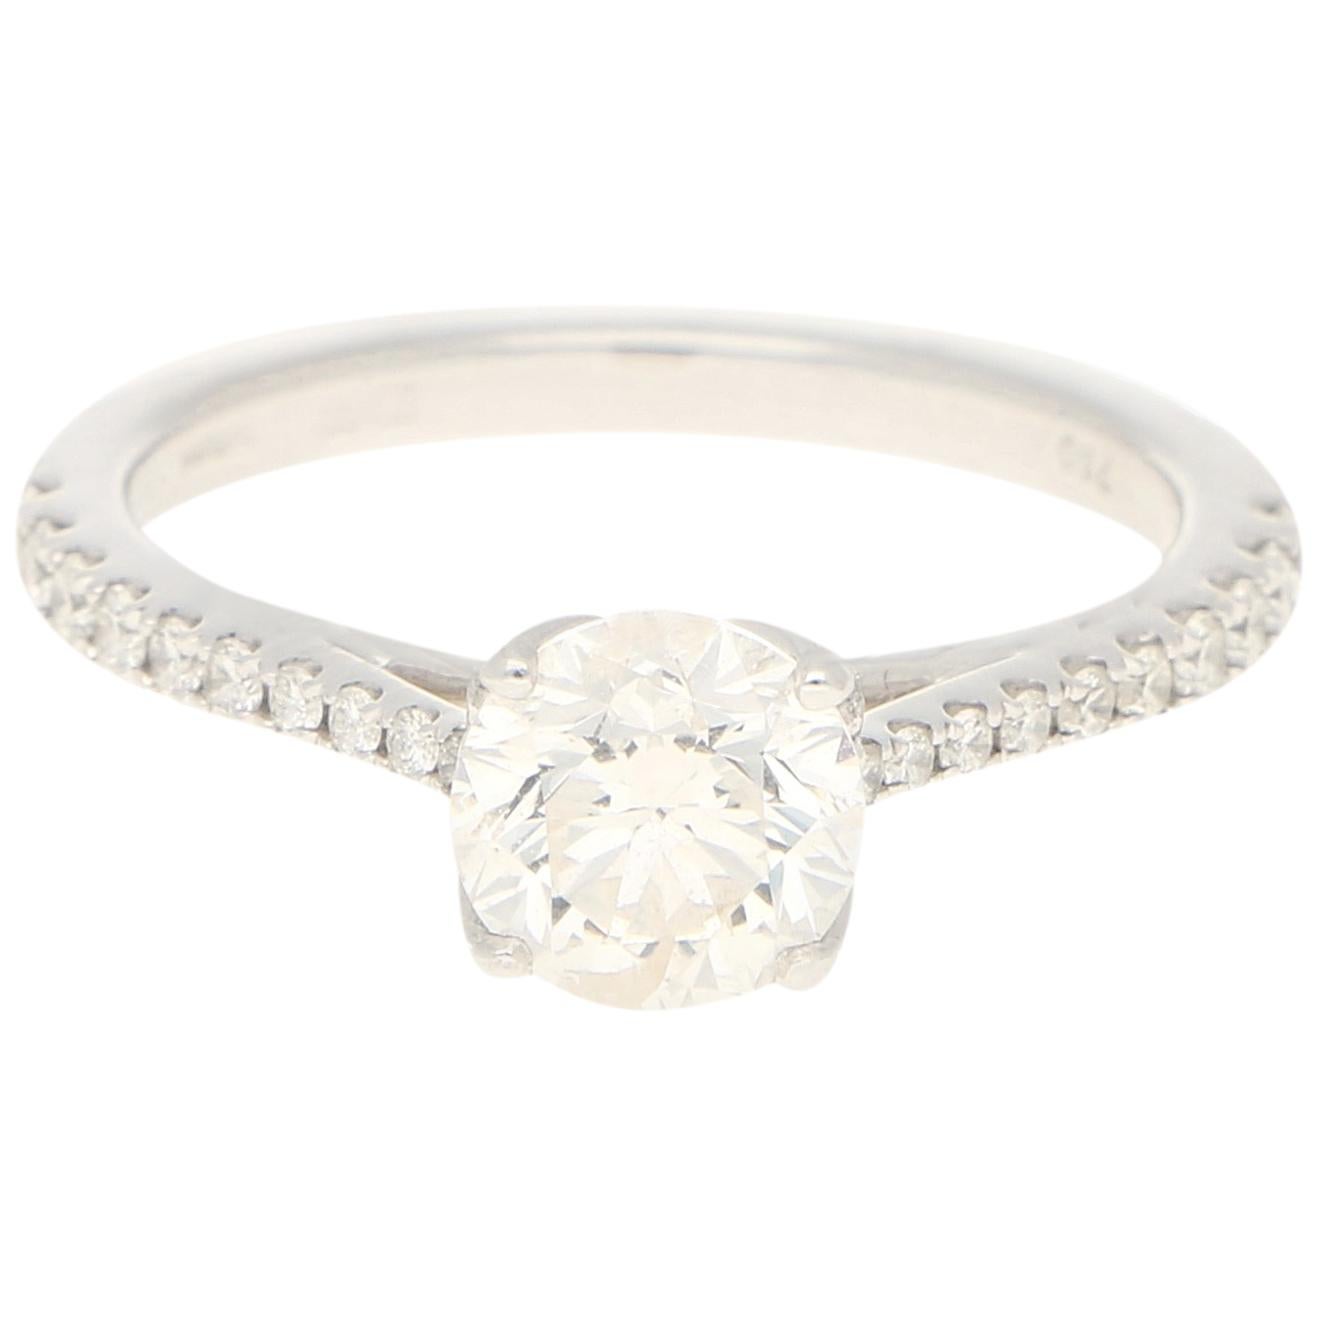 Diamond Solitaire Ring with Claw-Set Diamond Shoulders in White Gold 1.03 Carat 